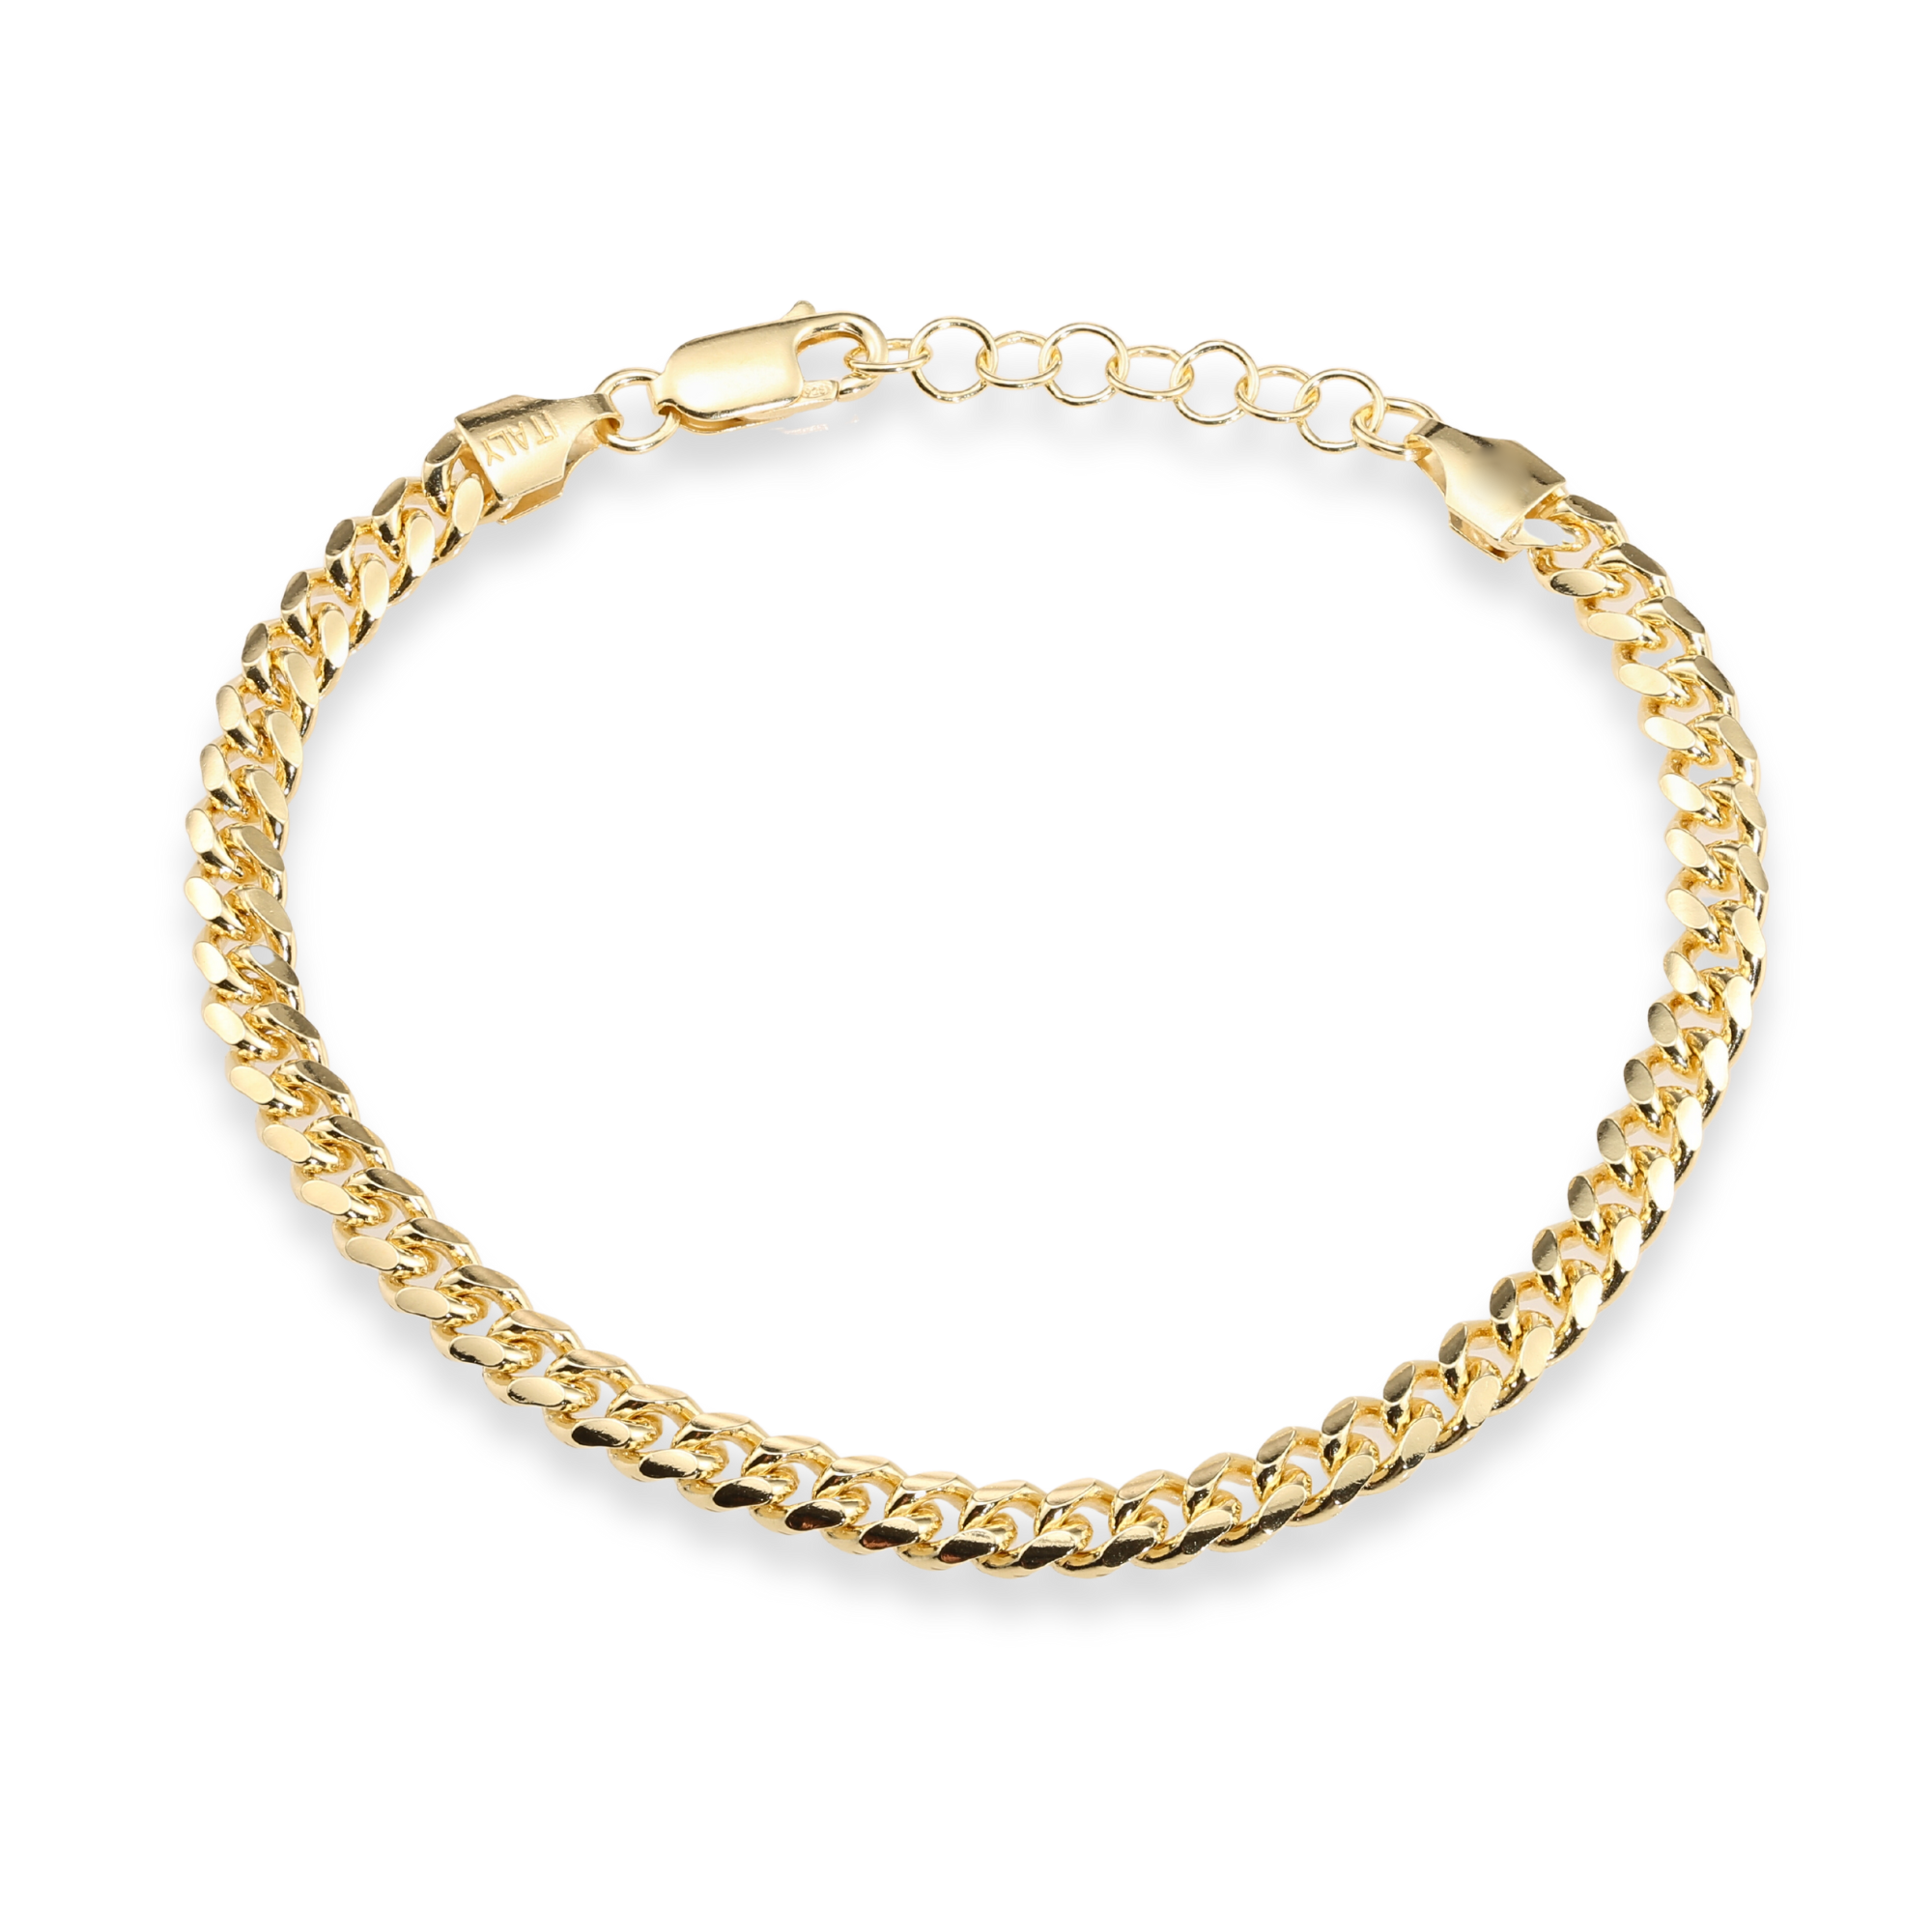 Miami Cuban Bracelet Dipped in 14k Yellow Gold, Solid Bracelet Available in 8 Inches or Adjustable Length 7 - 8 inches, Made In Italy in Sterling Silver